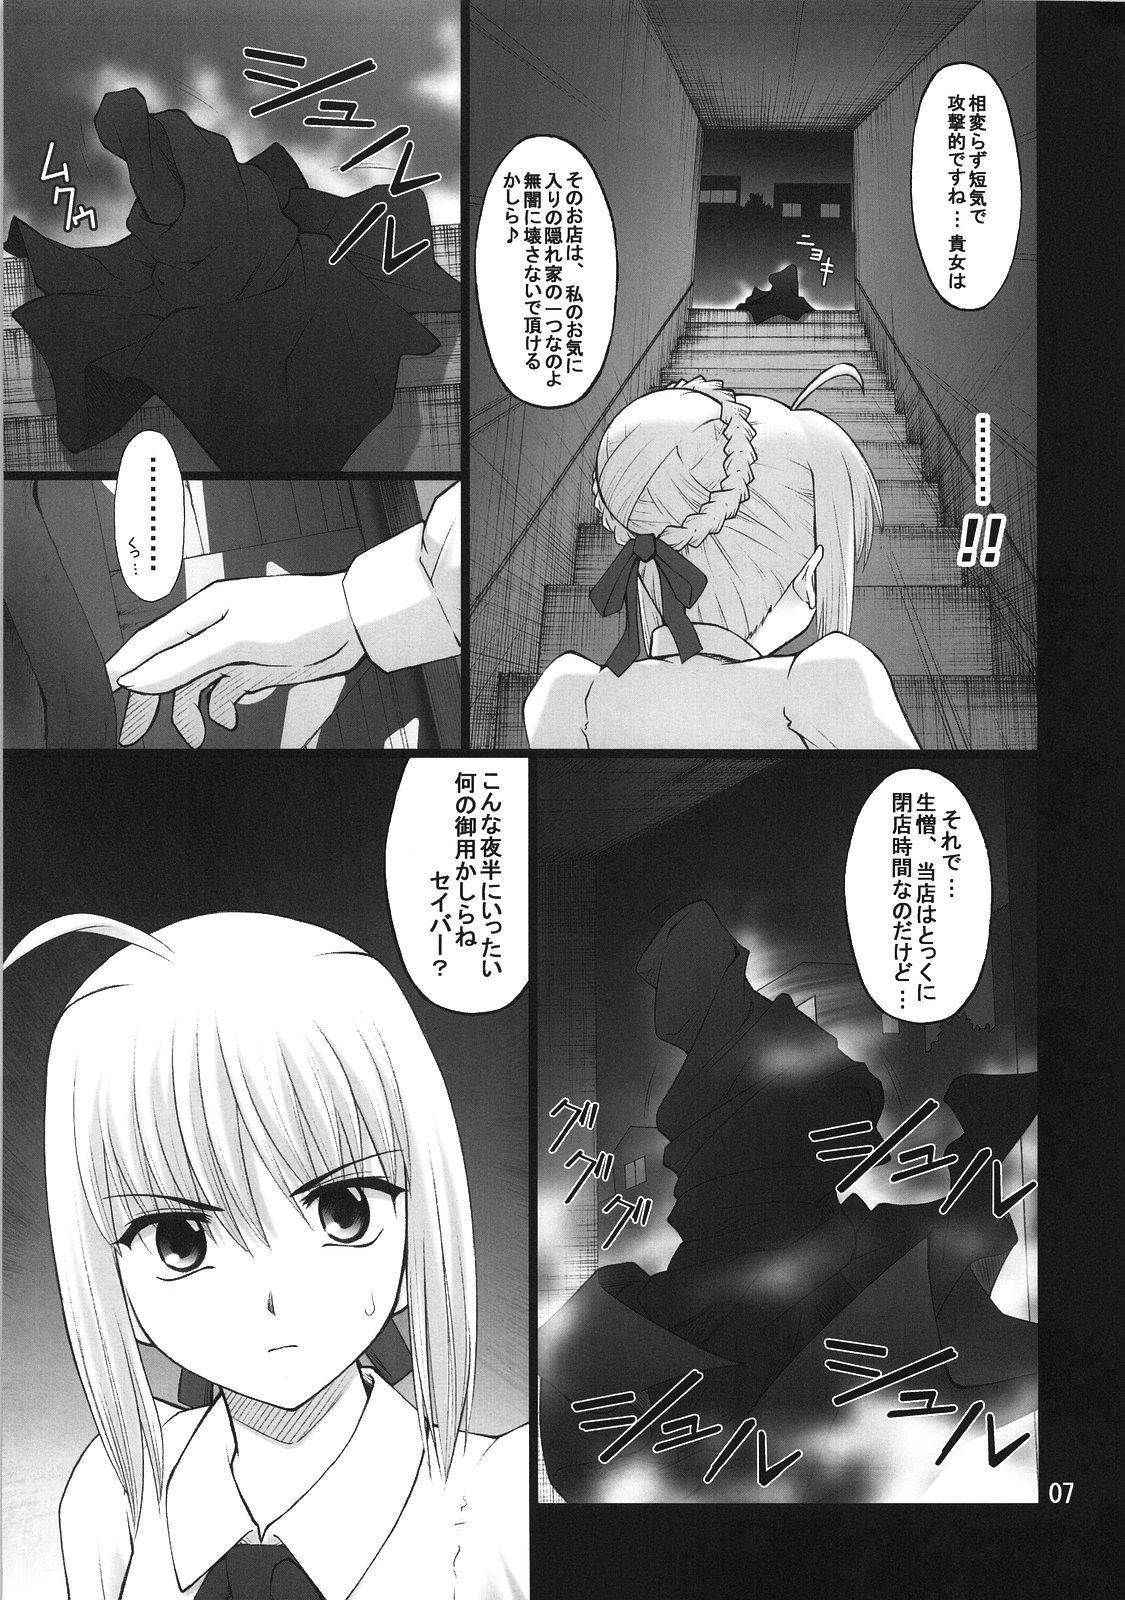 Breeding Grem-Rin 3 - Fate stay night Fate hollow ataraxia Asslicking - Page 6